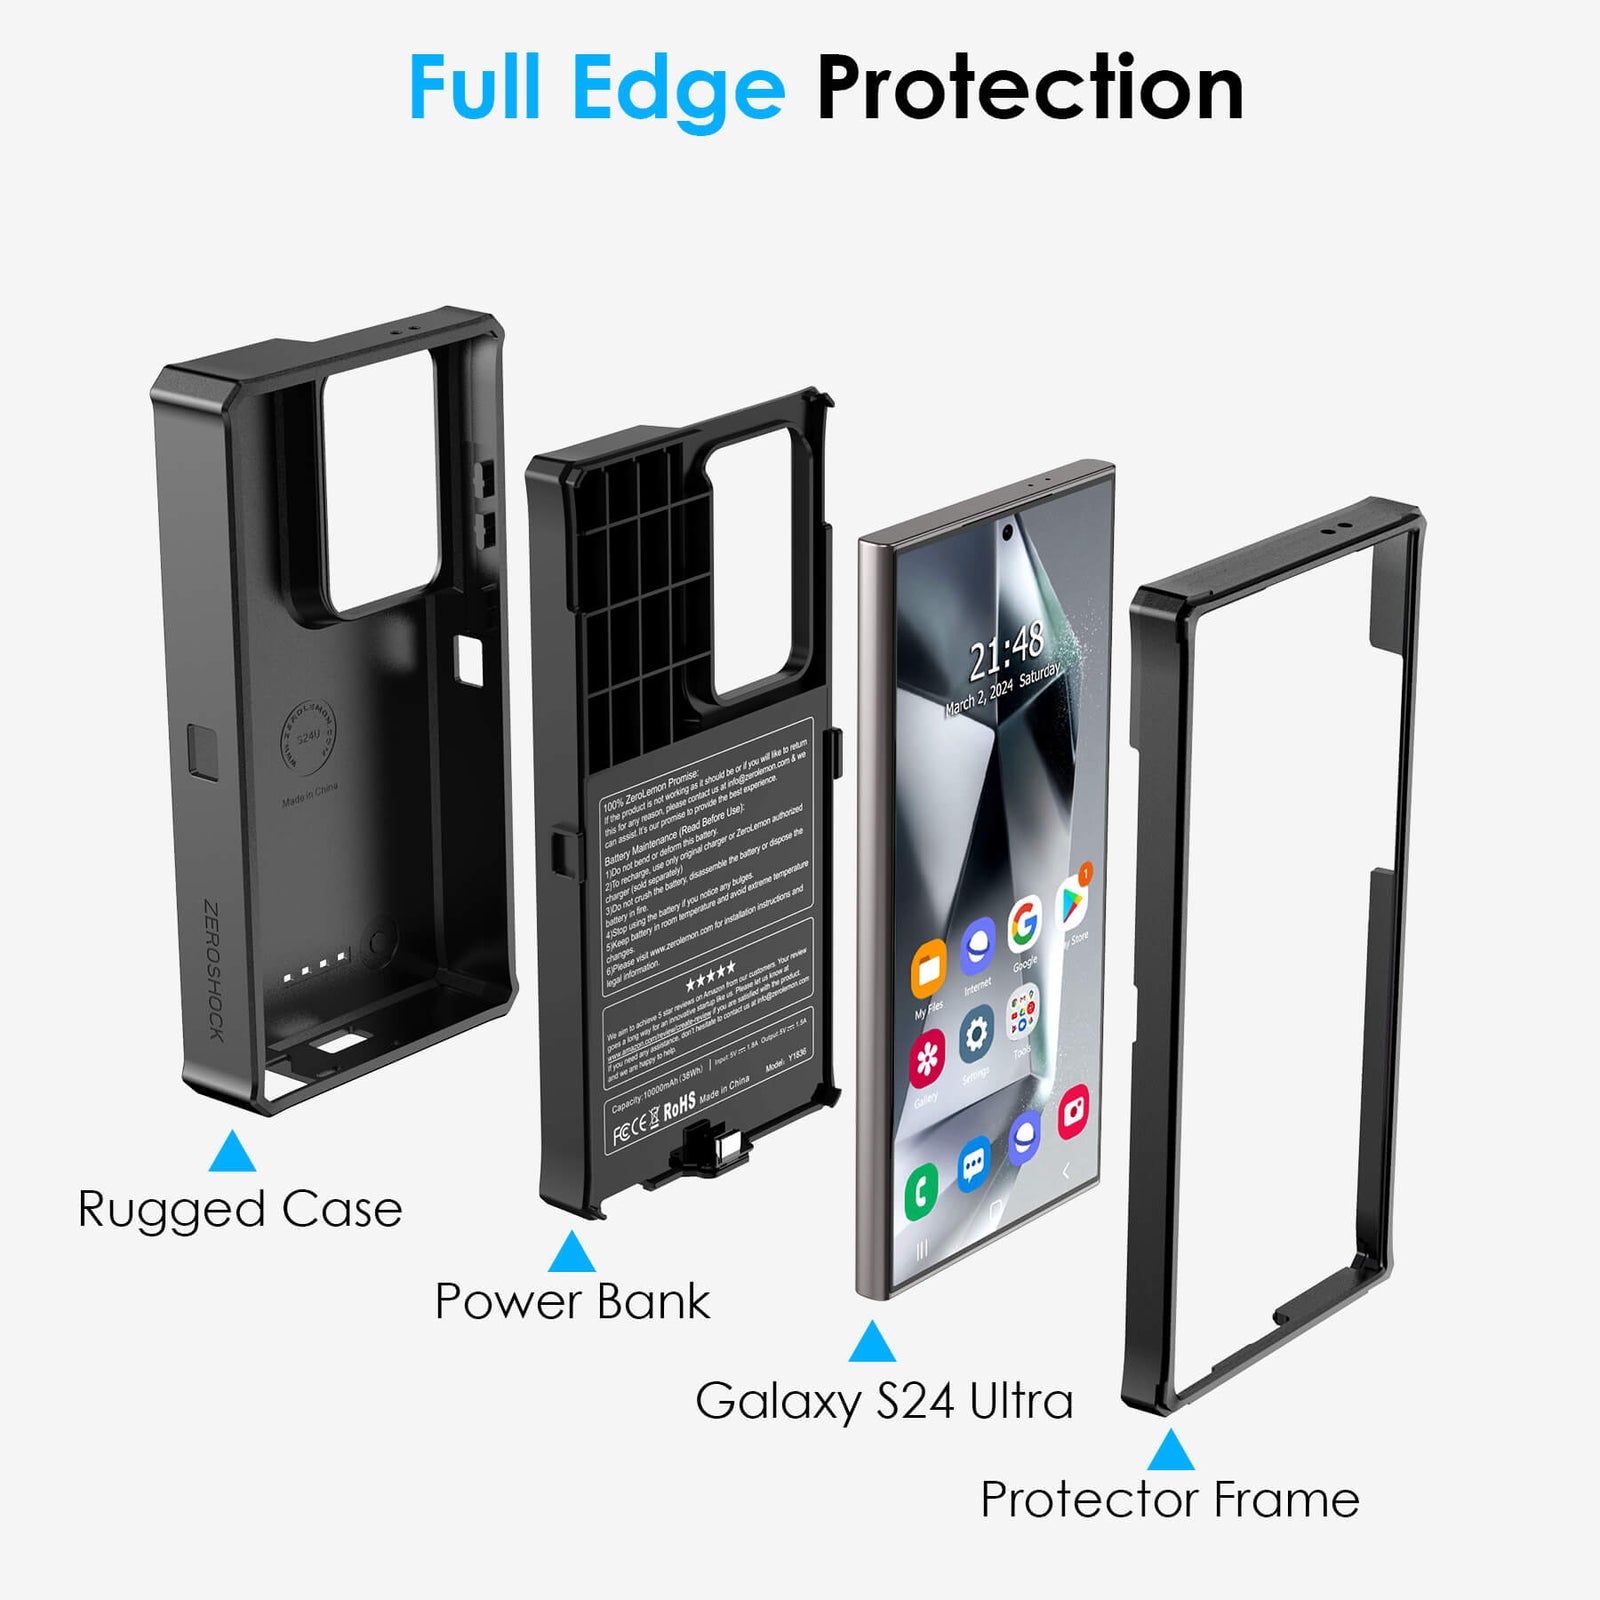 structure with rugged case, power bank, and protector frame